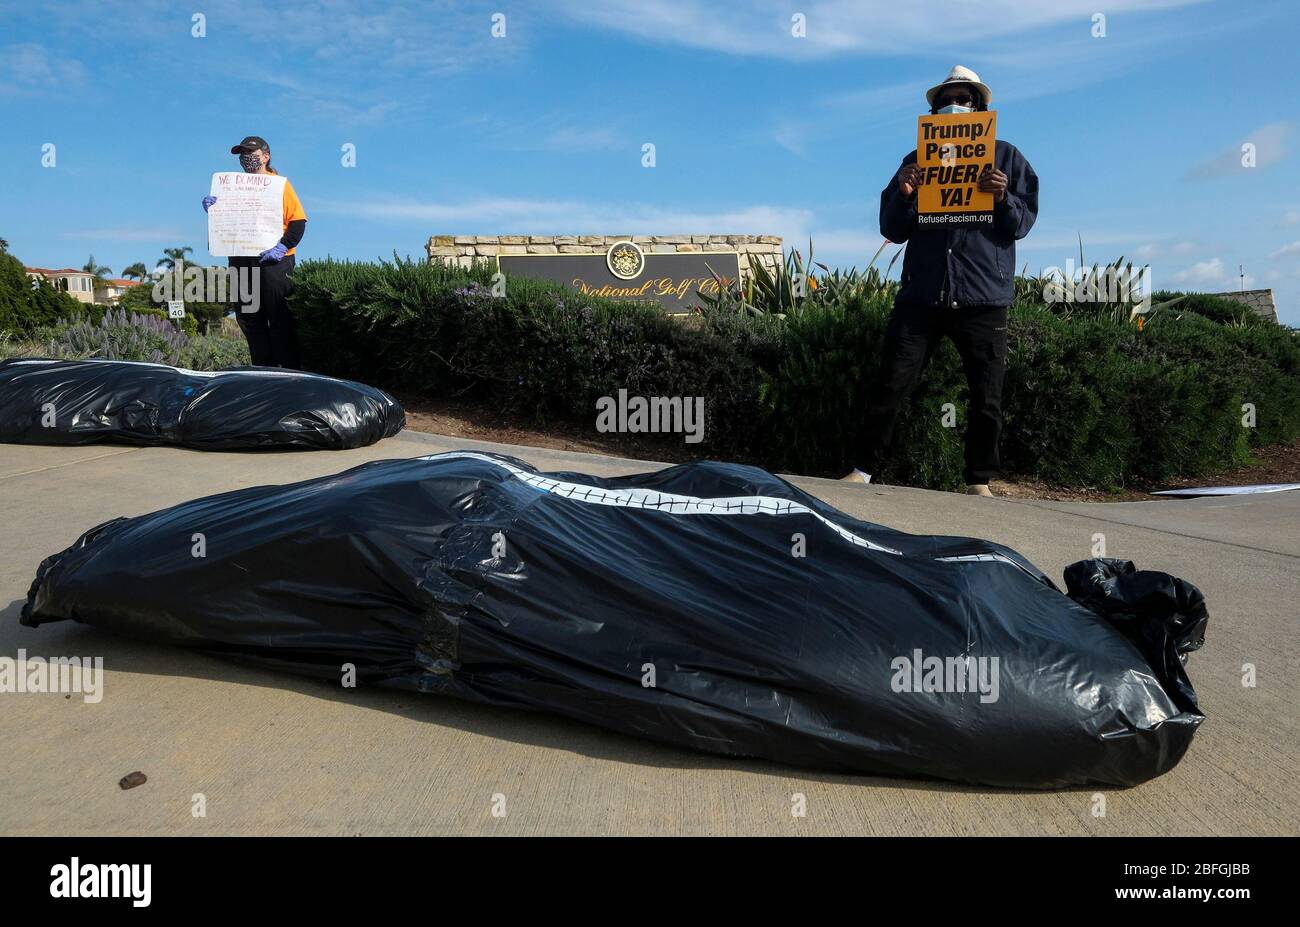 Los Angeles, California, USA. 18th Apr, 2020. Fake body bags are placed at outside Trump National Golf Club Los Angeles in protest against U.S. President Donald Trump's response to the coronavirus disease (COVID-19) pandemic, in Rancho Palos Verdes, California, April 18, 2020. Credit: Ringo Chiu/ZUMA Wire/Alamy Live News Stock Photo